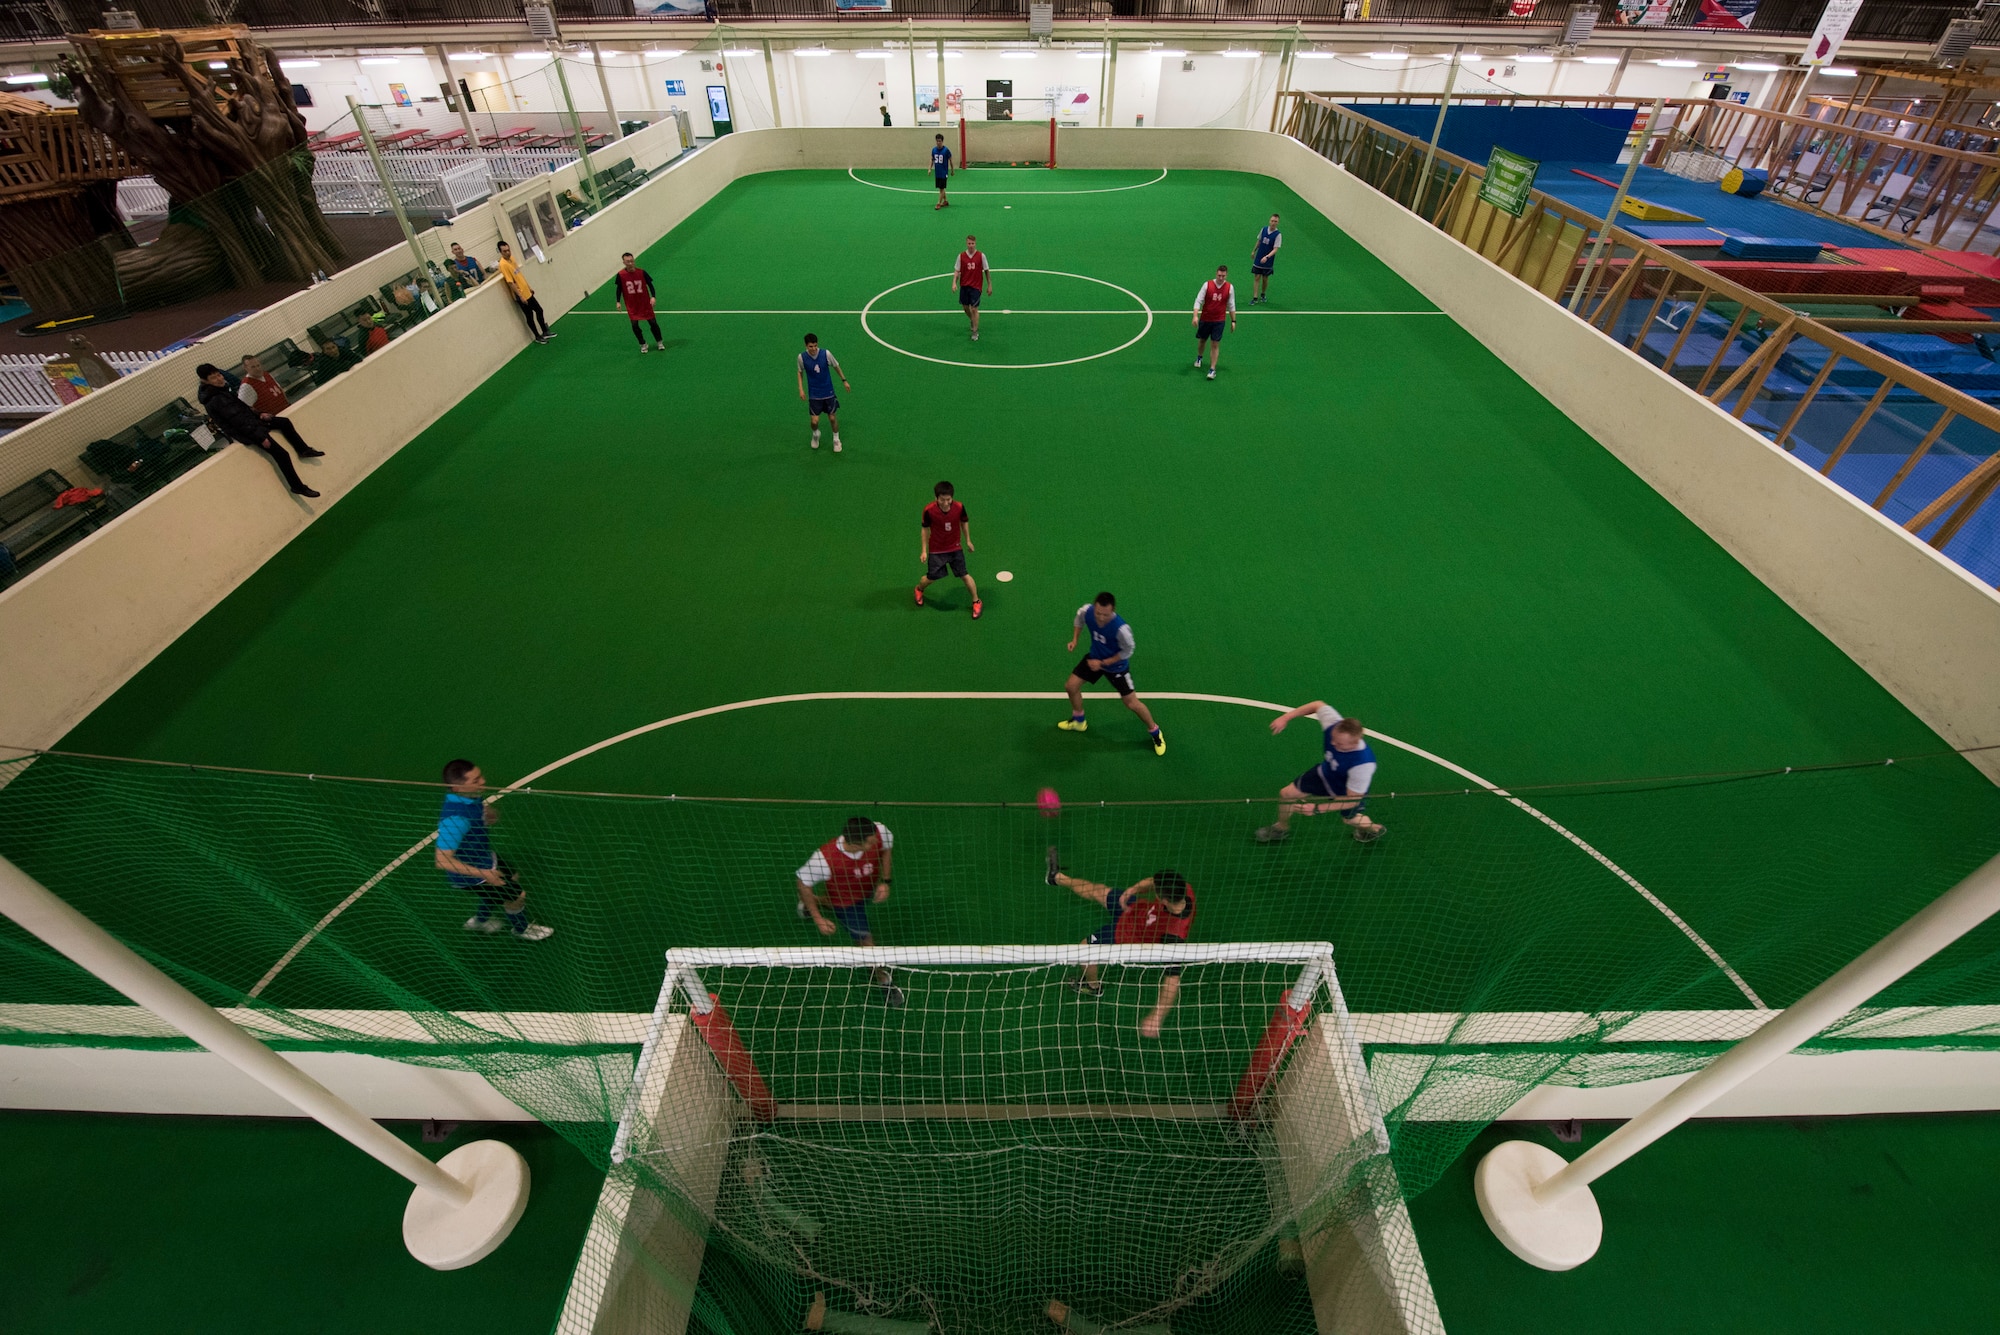 U.S. Air Force and Japan Air Self-Defense Force security forces members play in a bilateral soccer game at Misawa Air Base, Japan, March 15, 2019.  This soccer game helped bolster teamwork and relations between Japanese and American forces, allowing them to communicate in spite of the language barrier(U.S. Air Force photo by Branden Yamada)